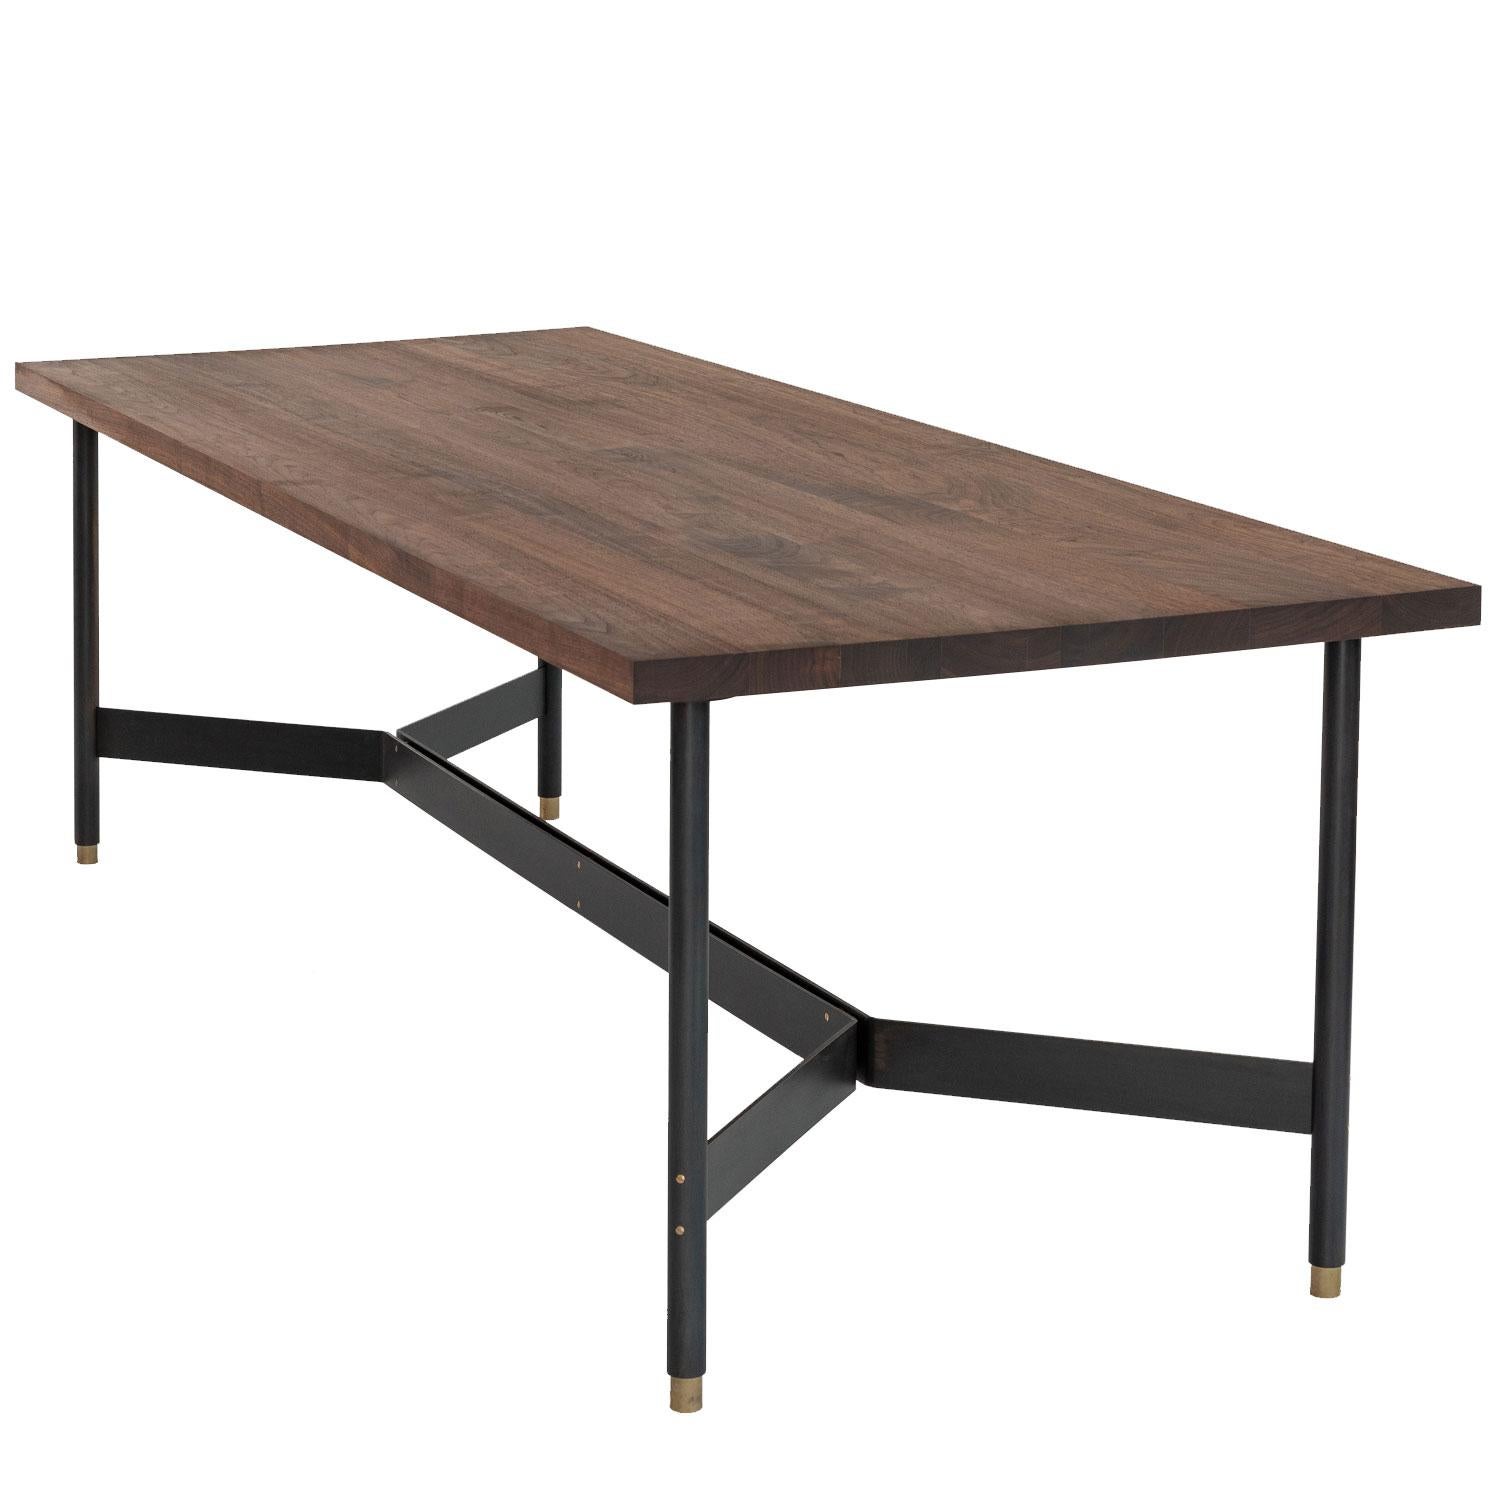 AT11, Solid Walnut & Blackened Steel Dining Table, Work Table, Desk